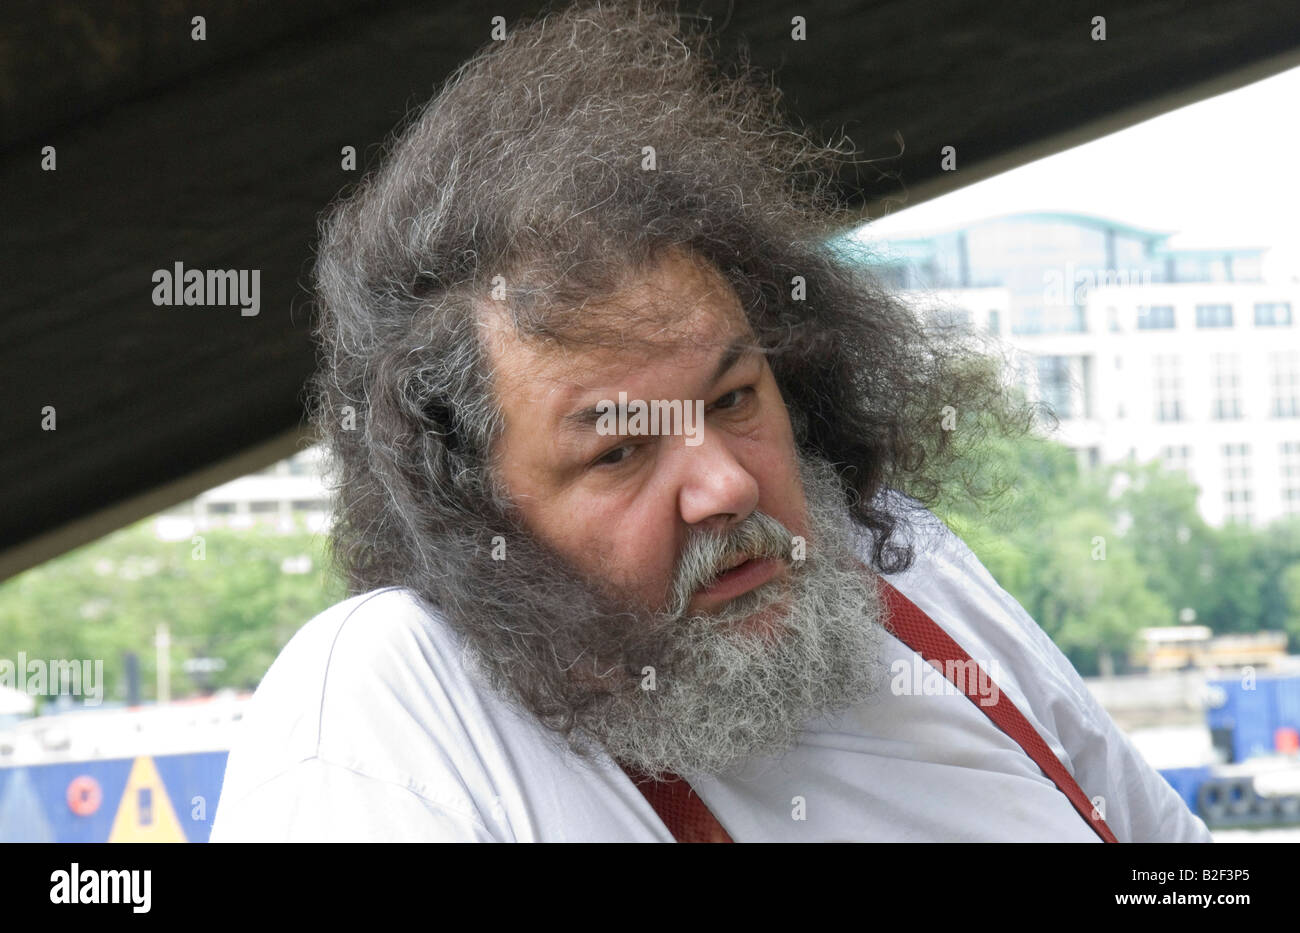 Fat Man With Long Hair High Resolution Stock Photography and Images - Alamy